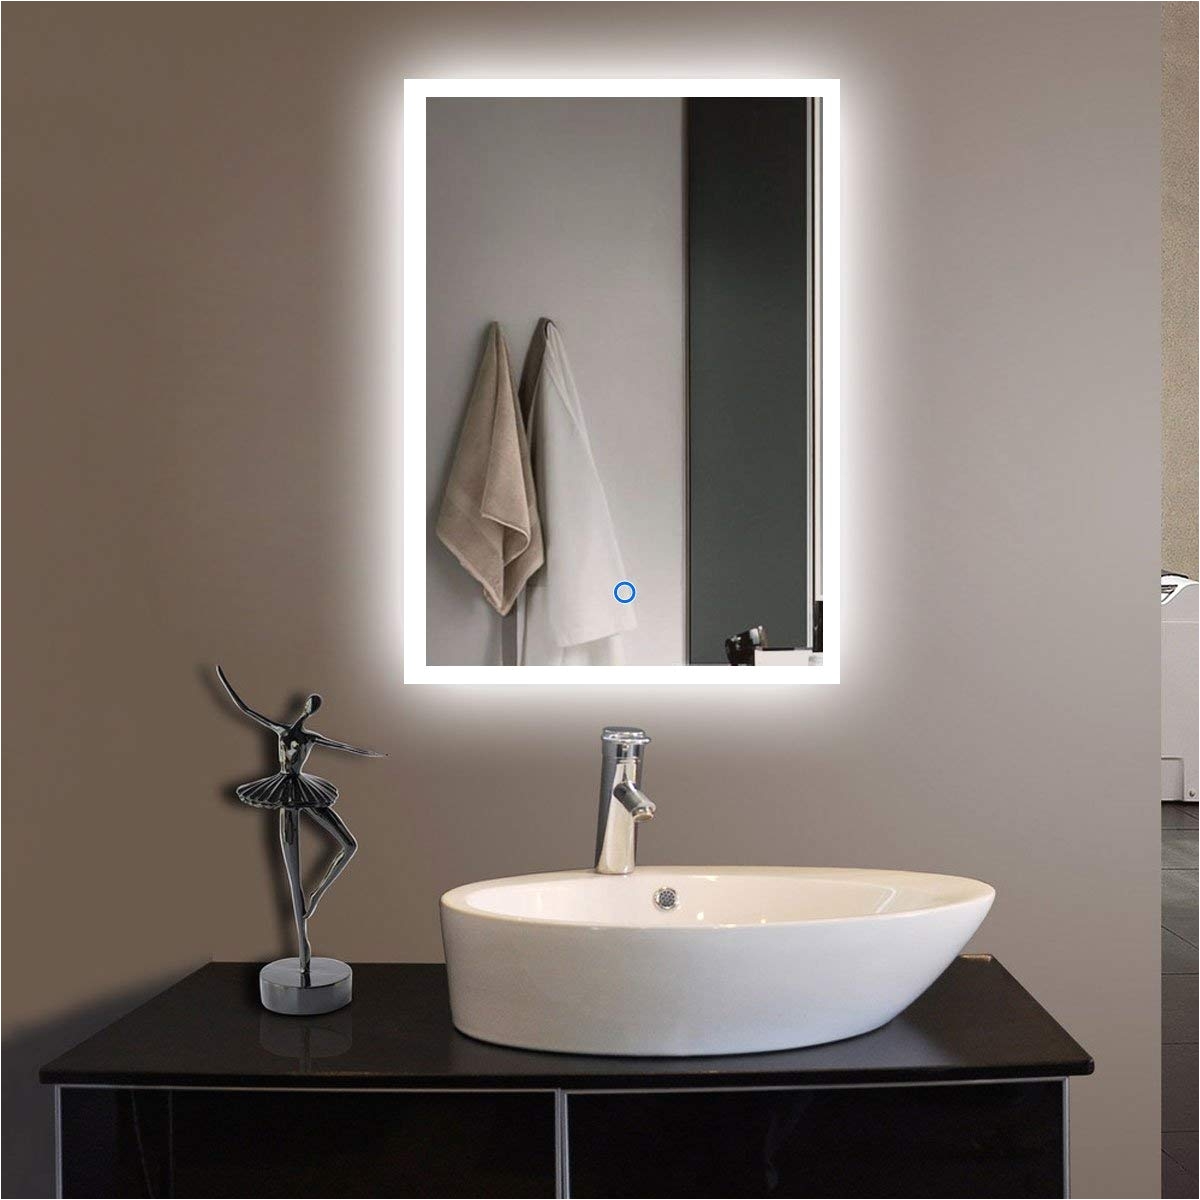 amazon com 20 x 28 in vertical led bathroom silvered mirror with touch button n031 h home kitchen